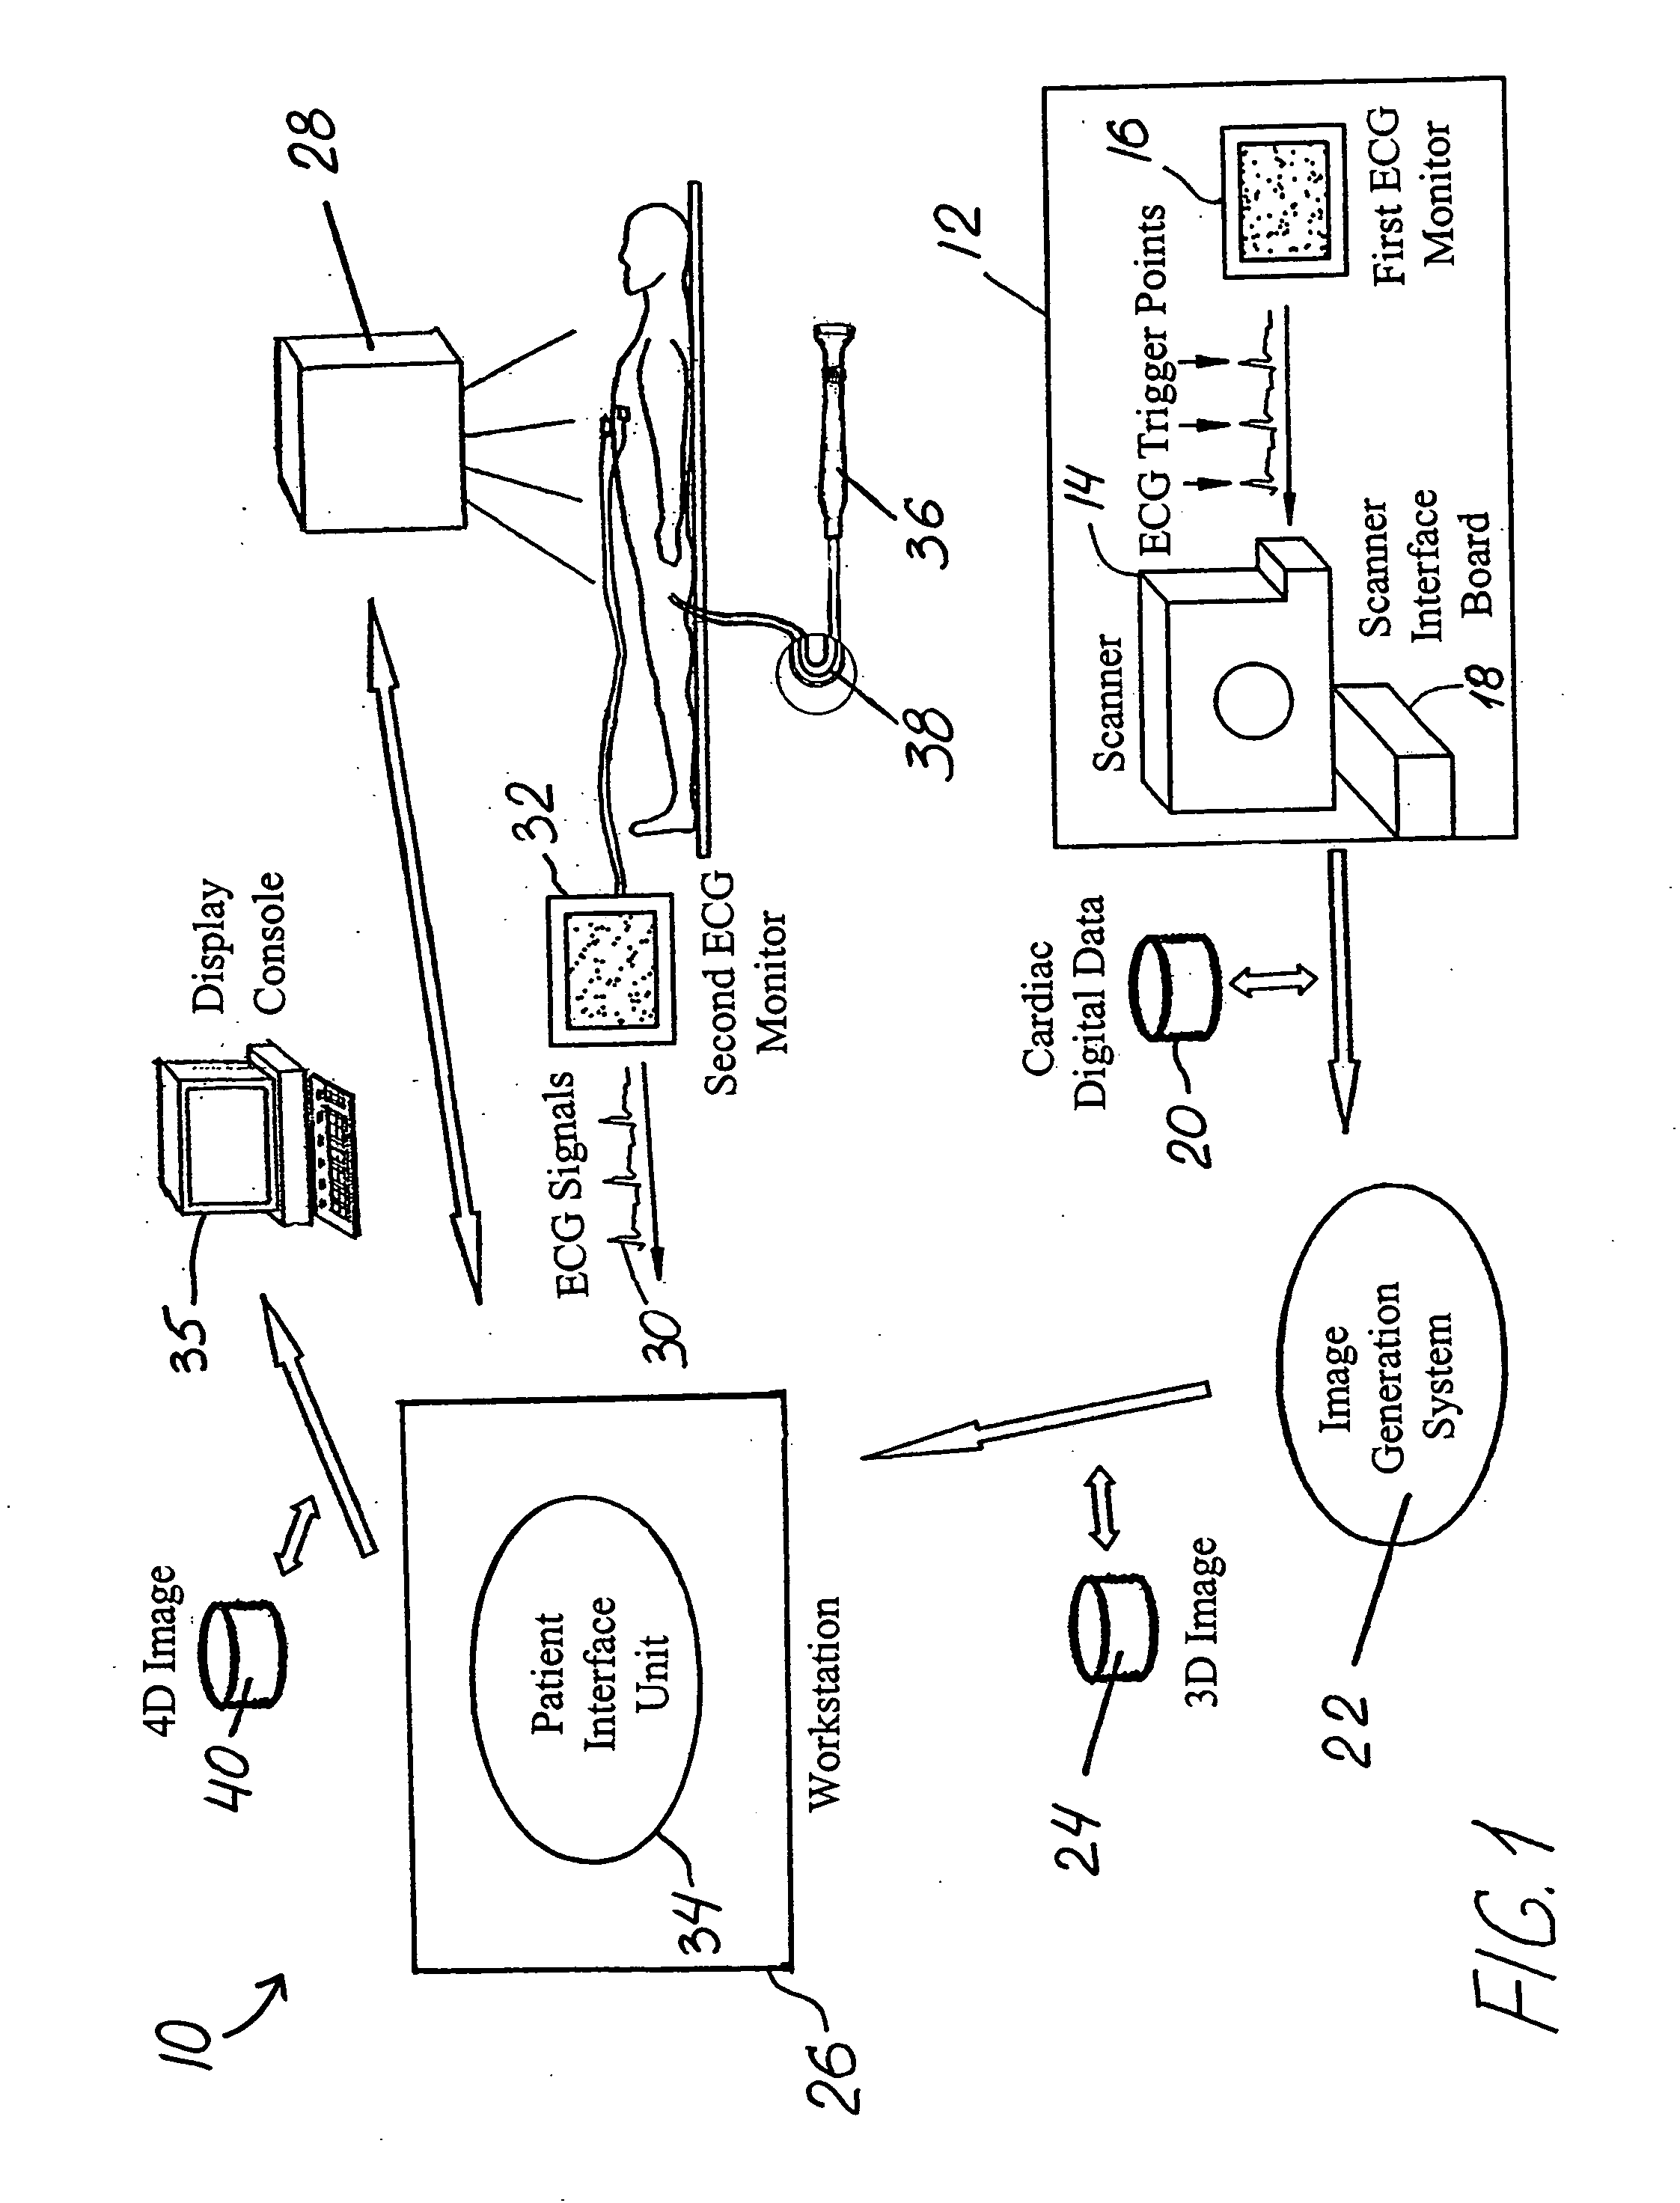 Method and system of treatment of heart failure using 4D imaging